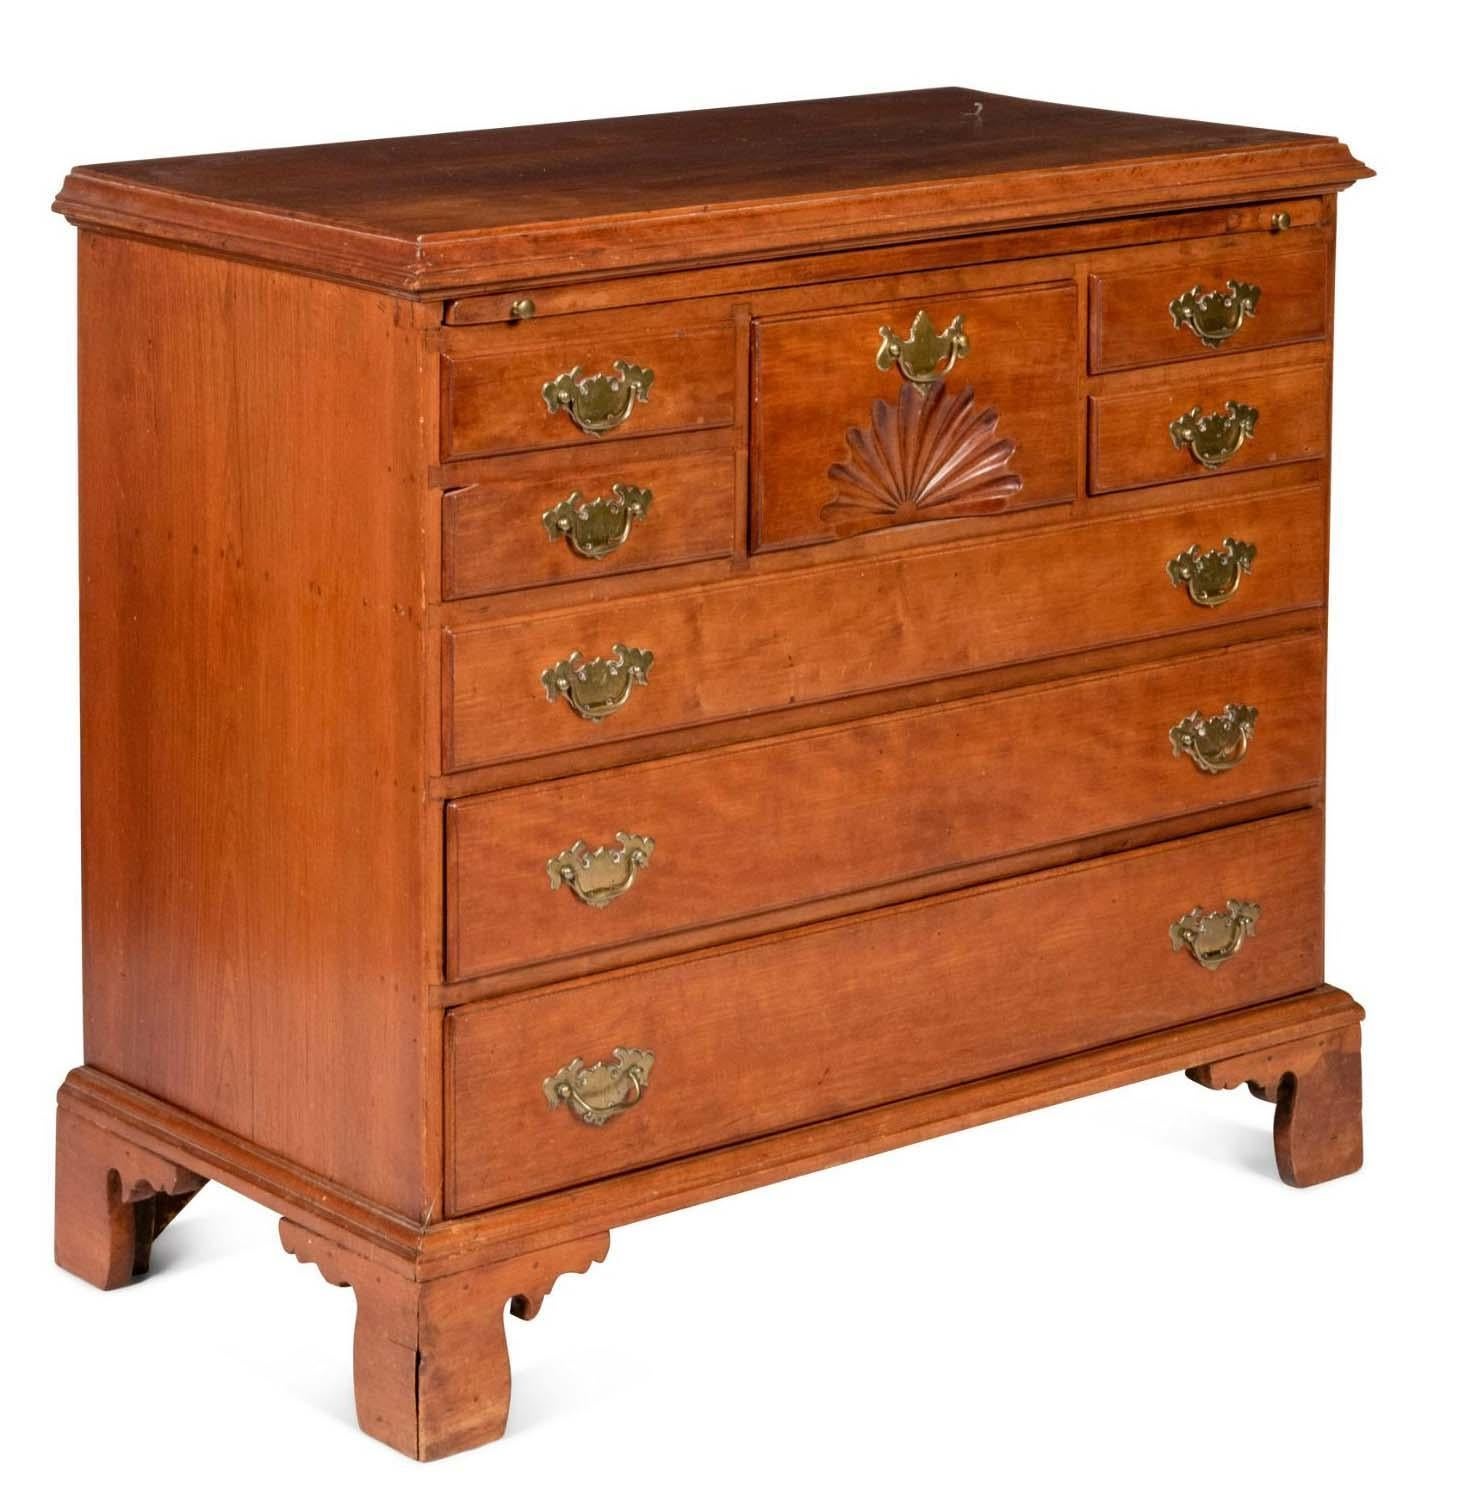 Hand-Crafted Antique Chippendale Fan-Carved Walnut Bachelor's Chest of Drawers